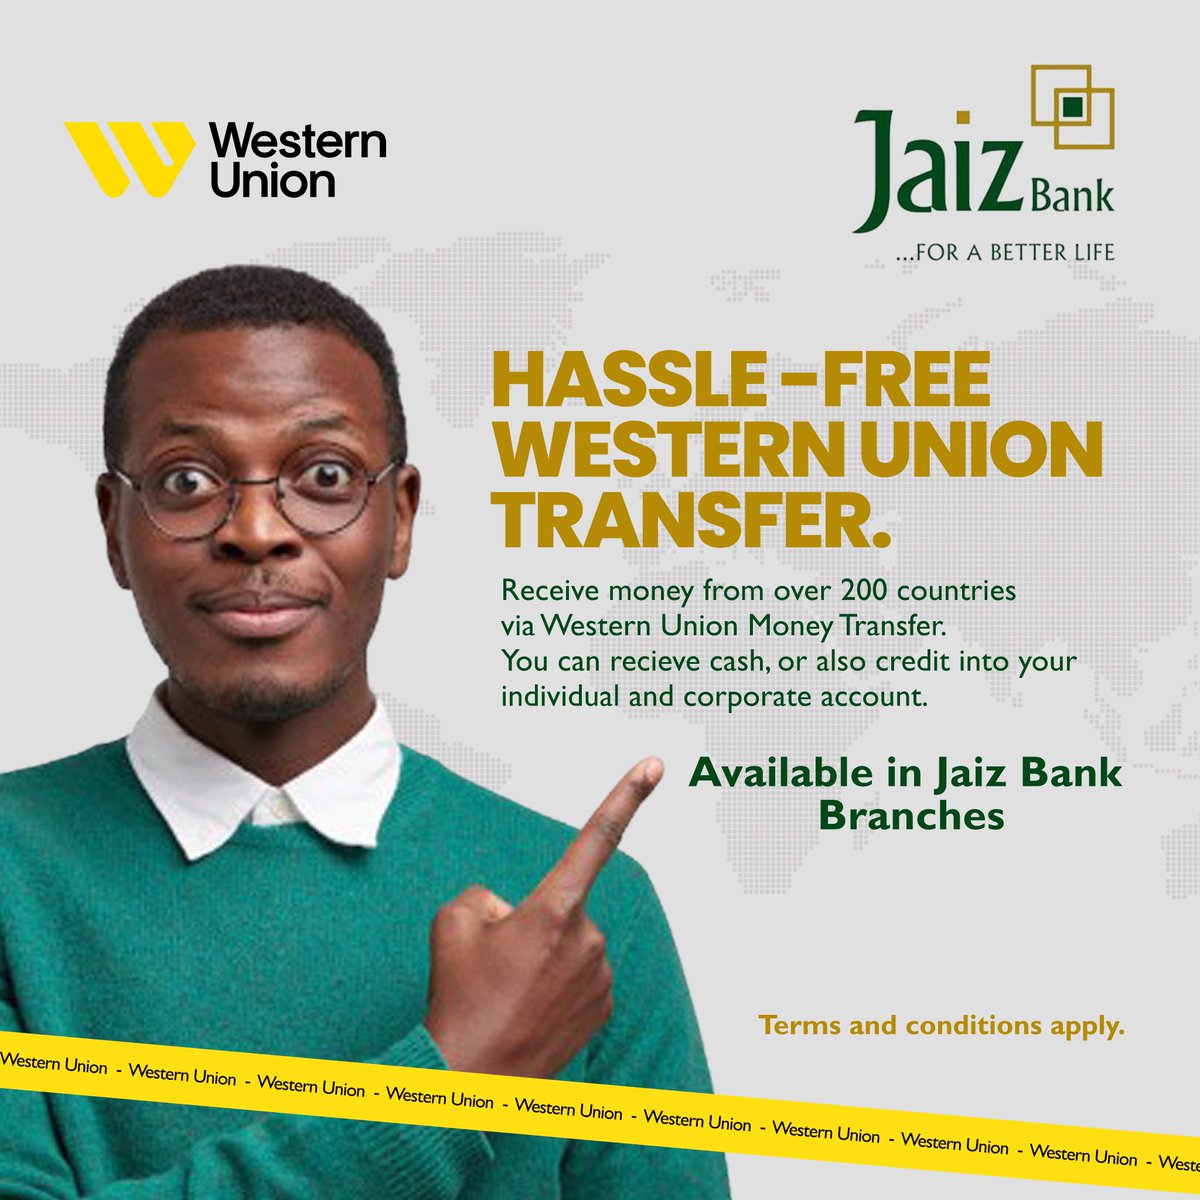 Walk into any of our branches and get started.
#JaizBank #forabetterlife #WesternUnion #MoneyTransfer